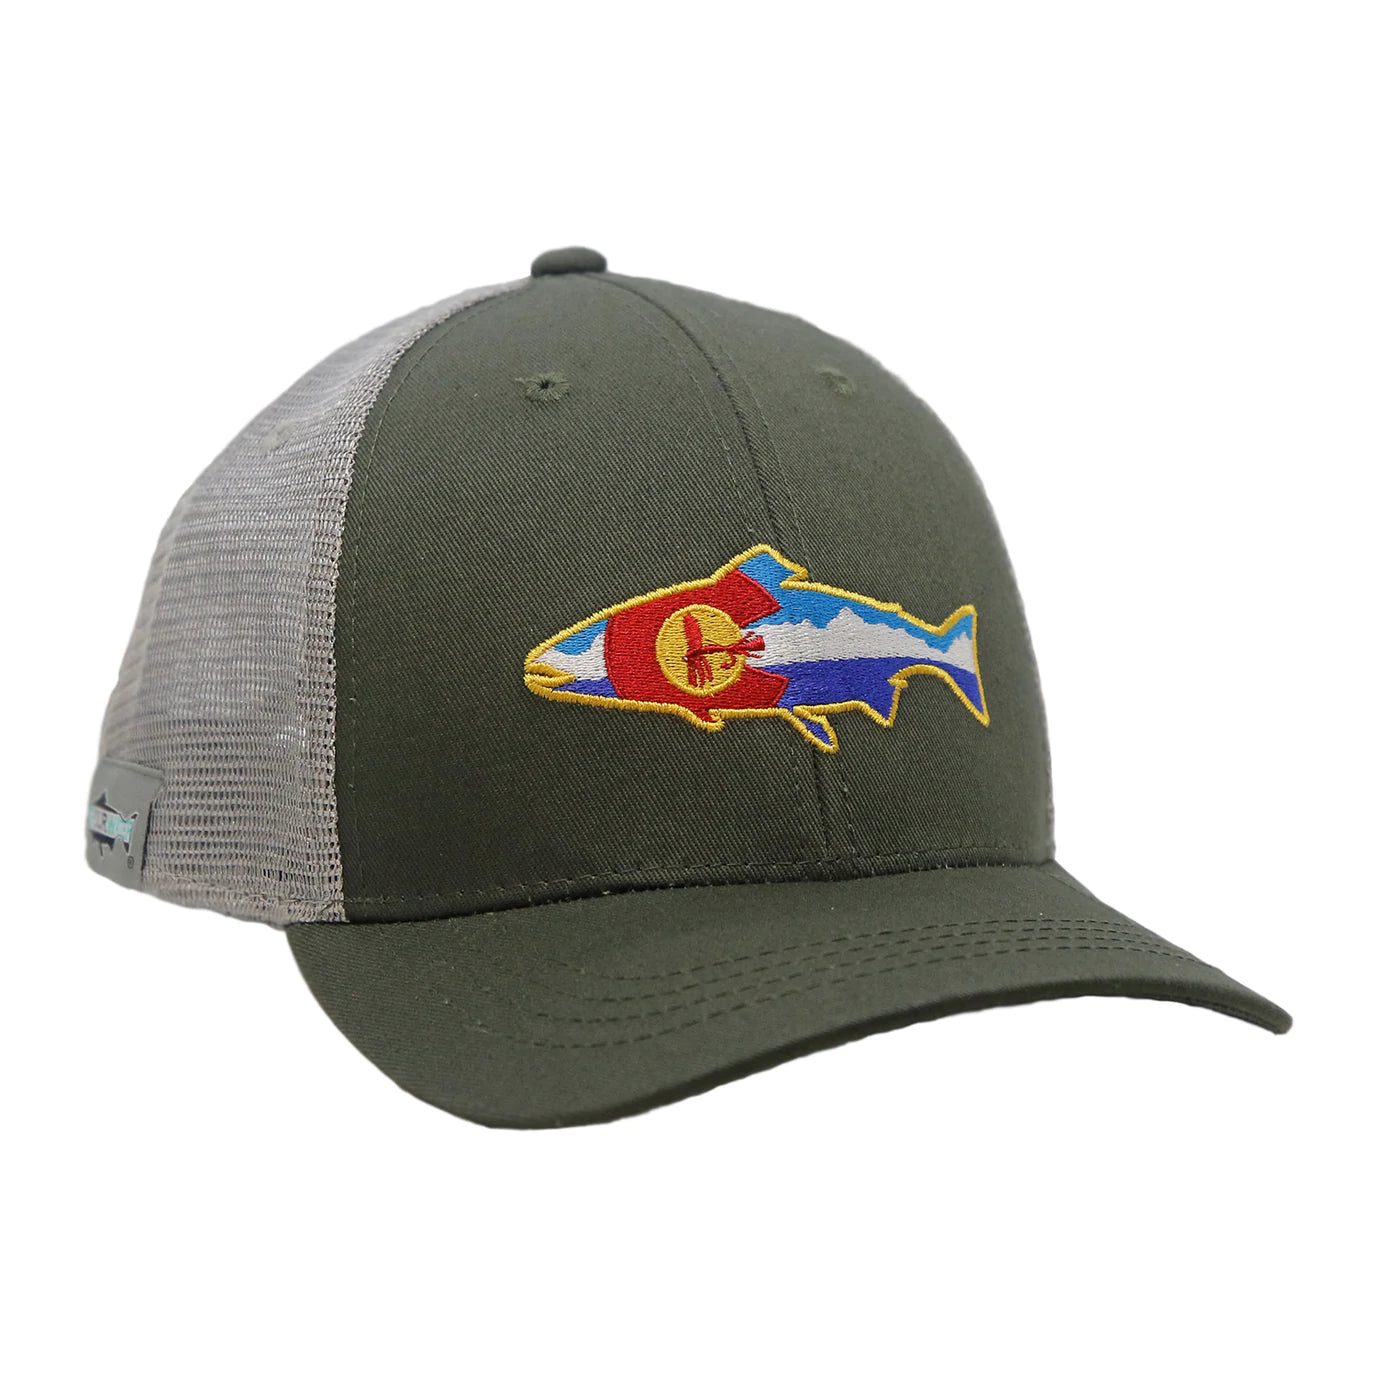 Rep Your Water Colorado Fly and Mountains Hat